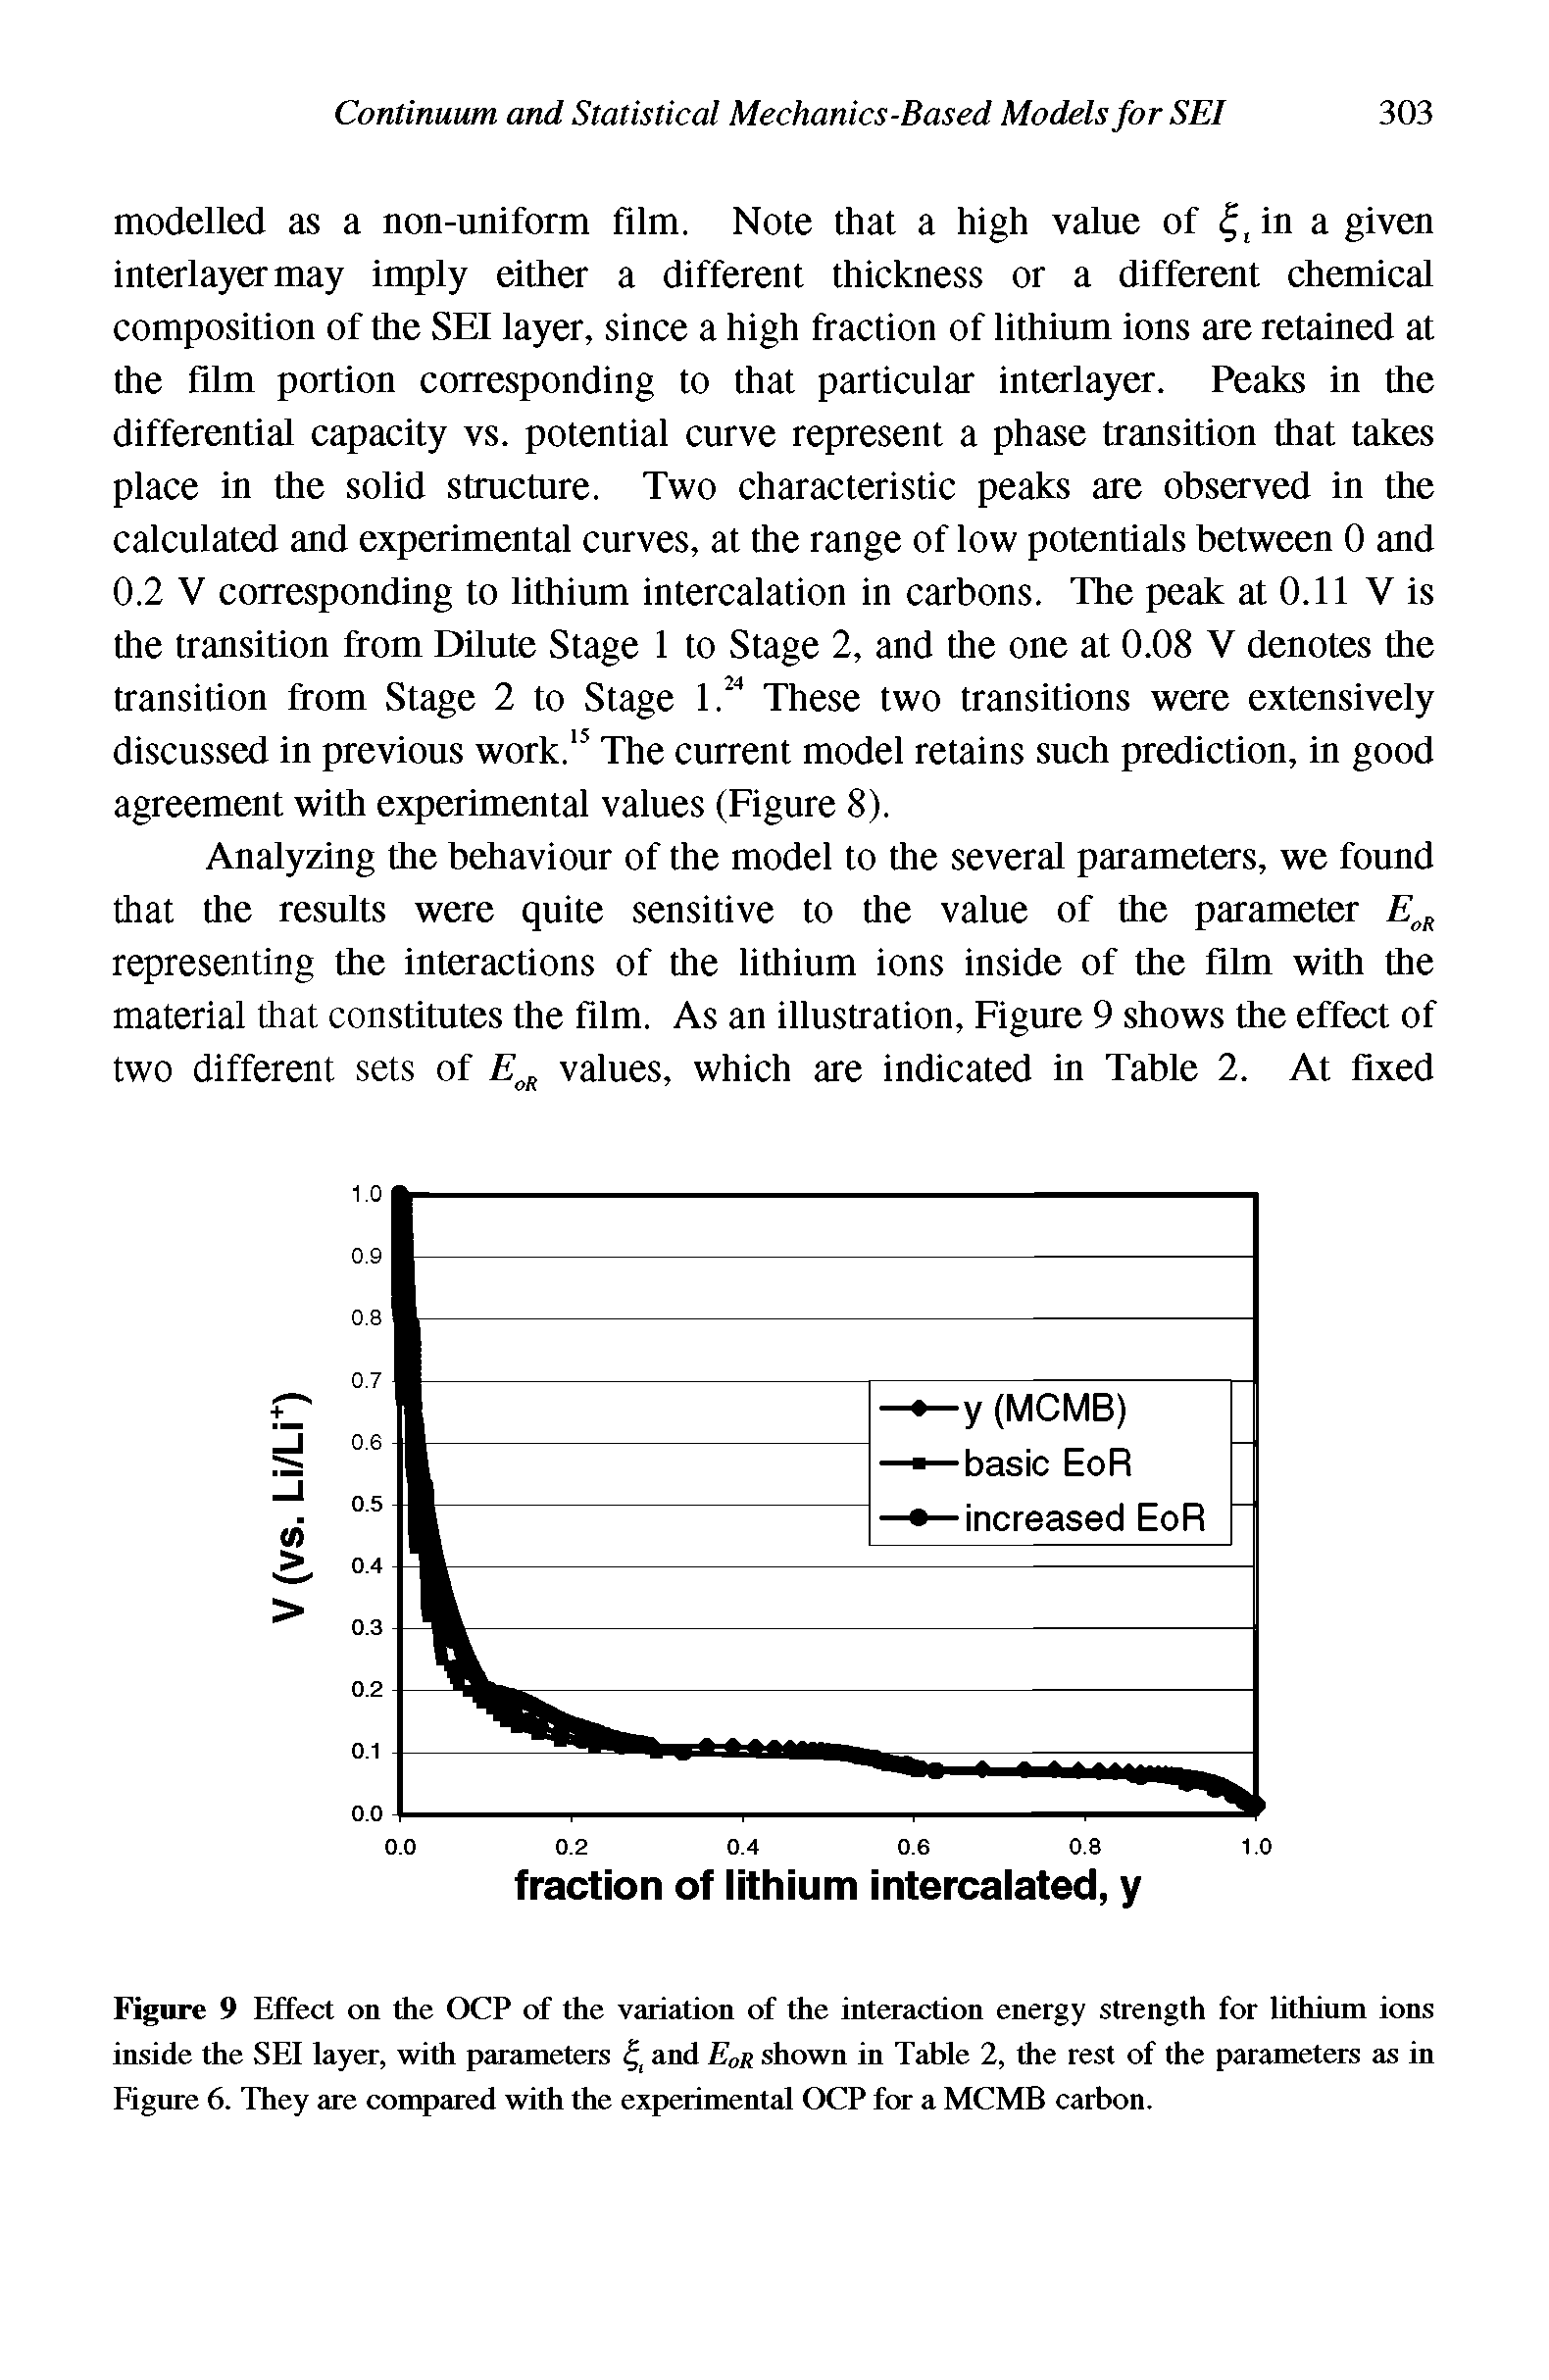 Figure 9 Effect on the OCP of the variation of the interaction energy strength for lithium ions inside the SEI layer, with parameters and shown in Table 2, the rest of the parameters as in Eigure 6. They are compared with the experimental OCP for a MCMB carbon.